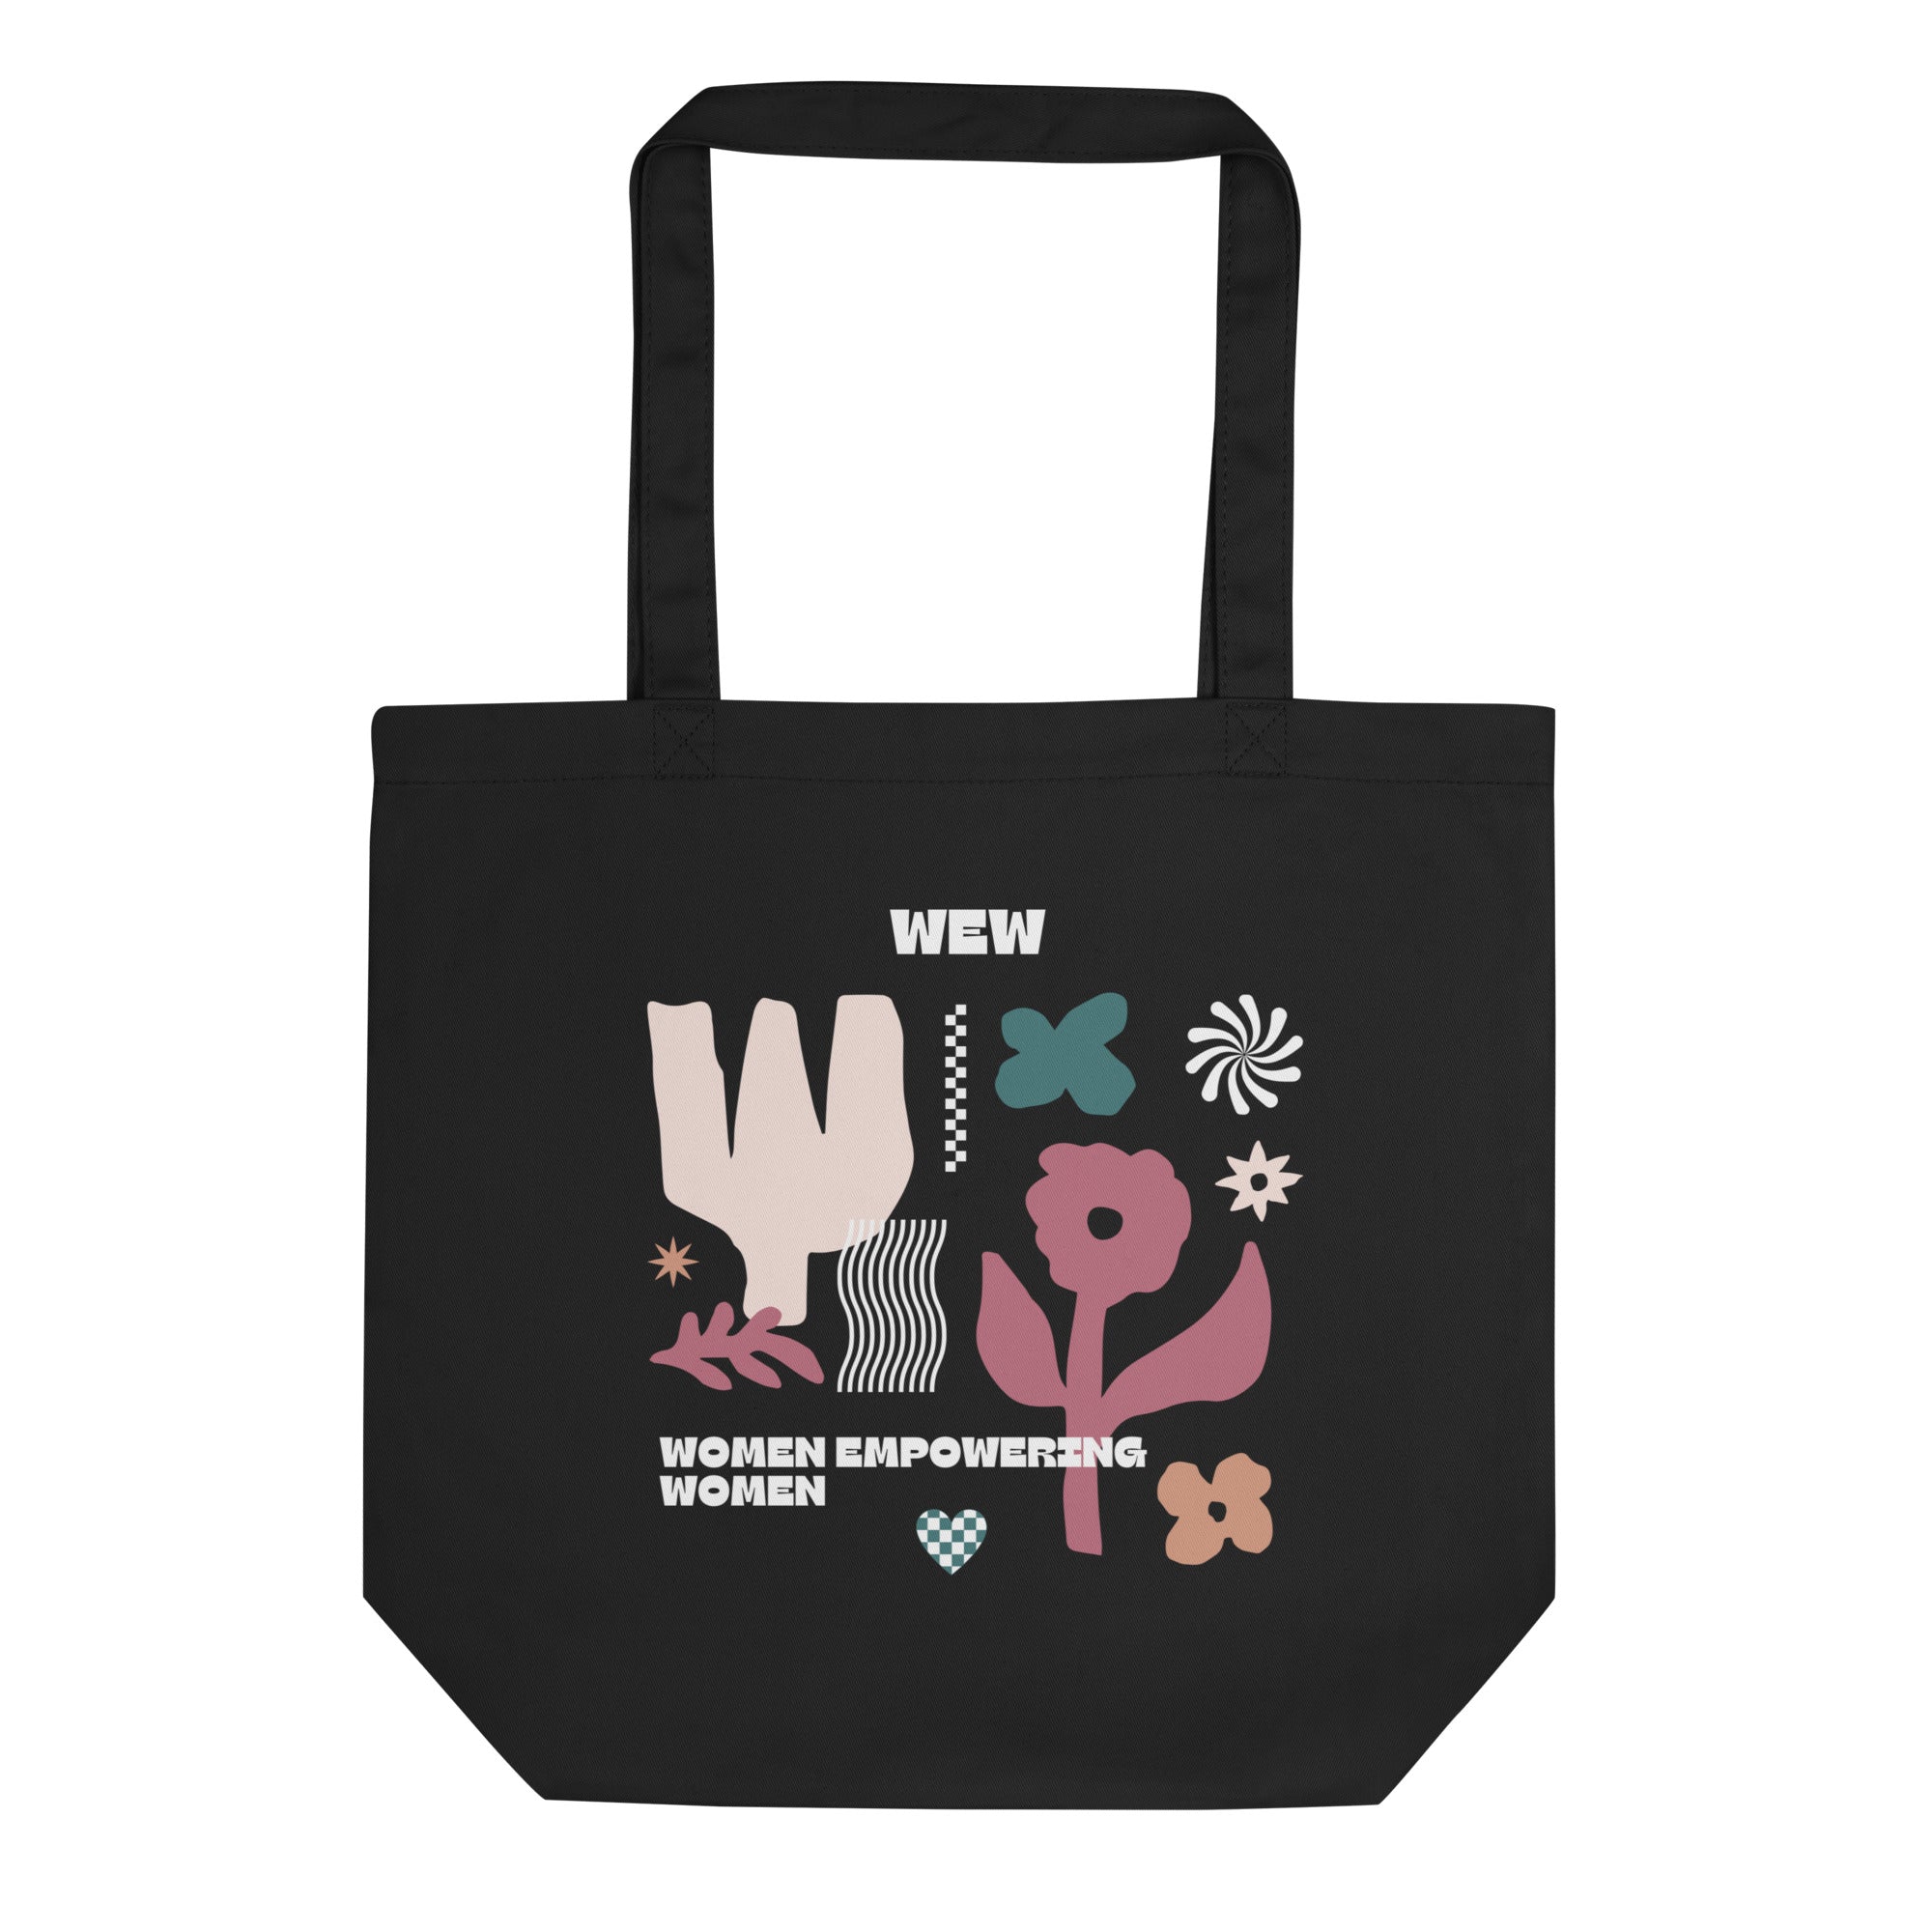 Organic Cotton black tote bag against a white background. Tote bag has various green and pink flowers and the phrase women empowering women